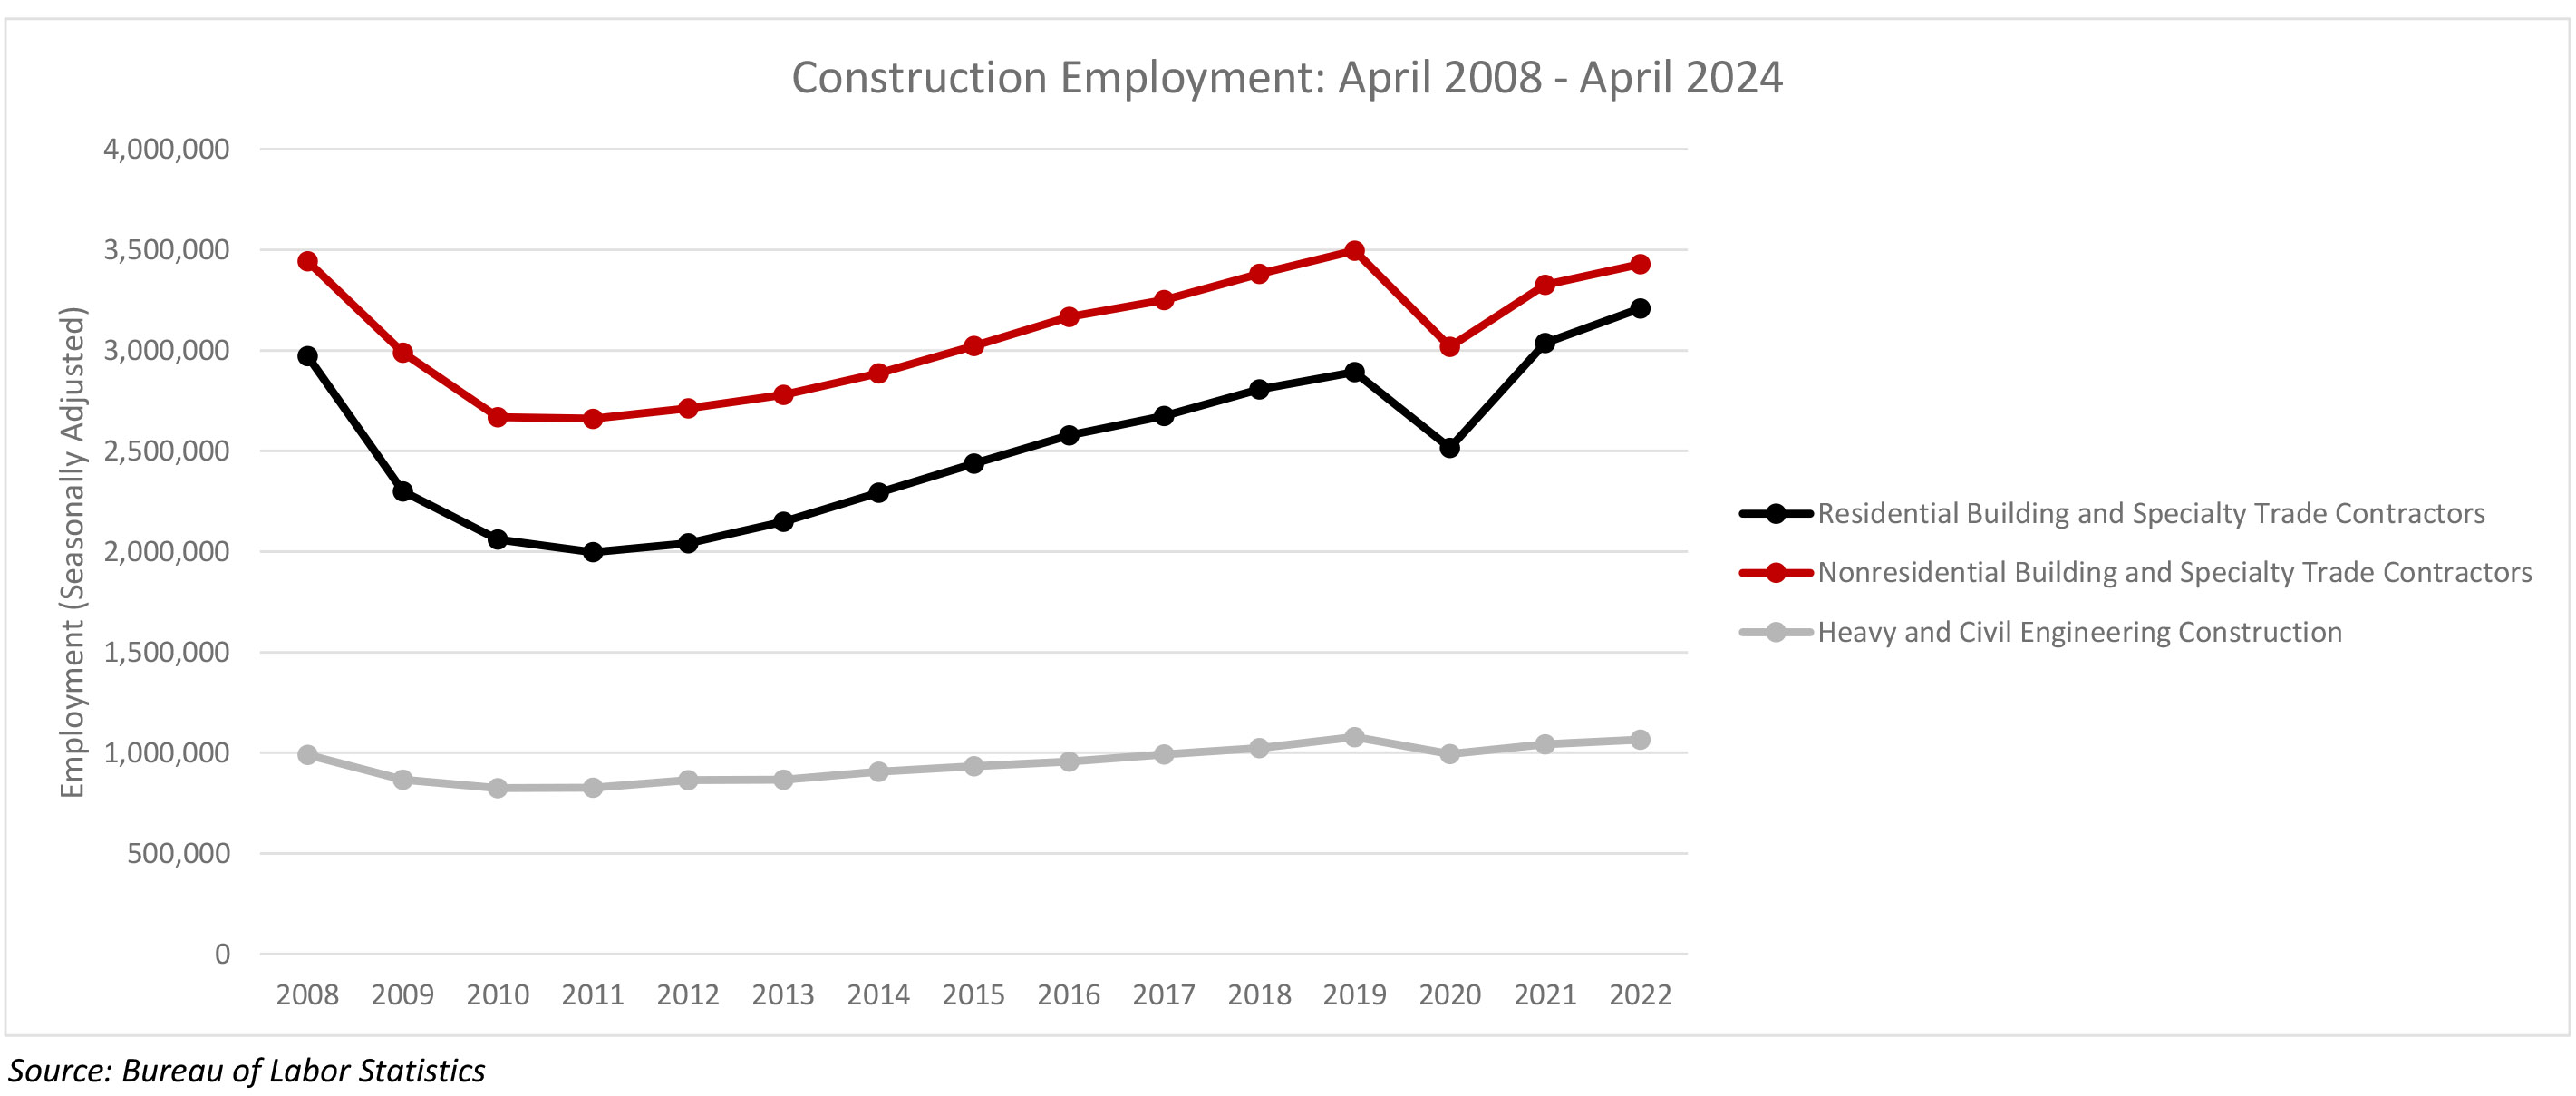 Nonresidential Construction Adds 7,800 Jobs in April